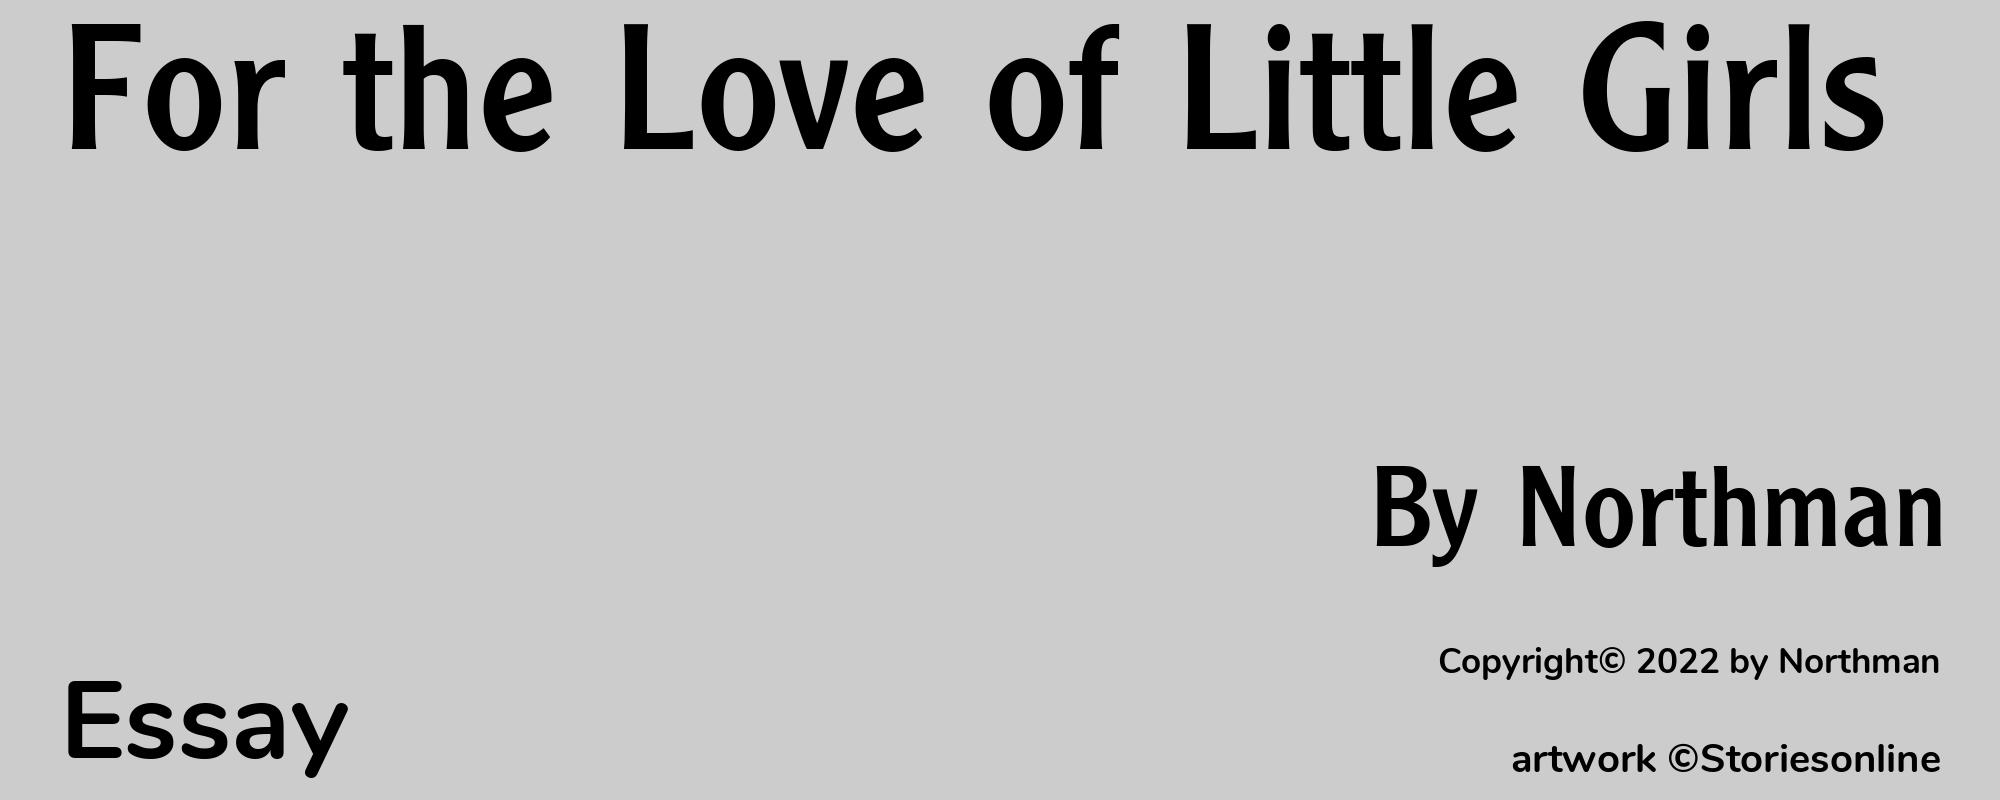 For the Love of Little Girls - Cover